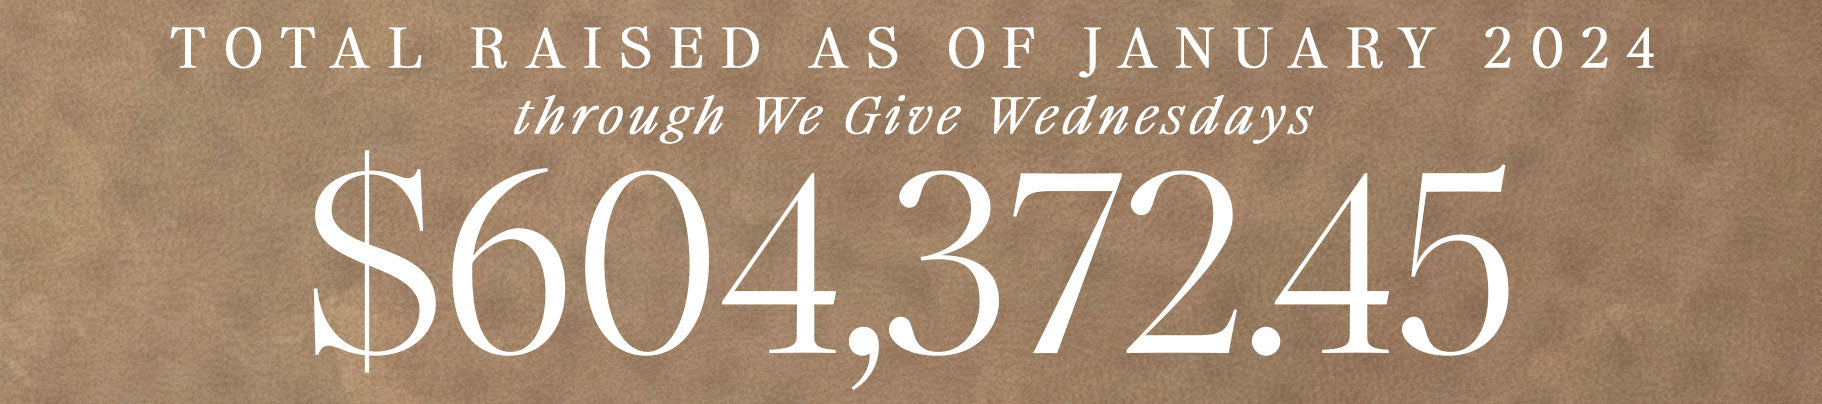 total raised through We Give Wednesdays as of Jan. 2024 = $604,372.45